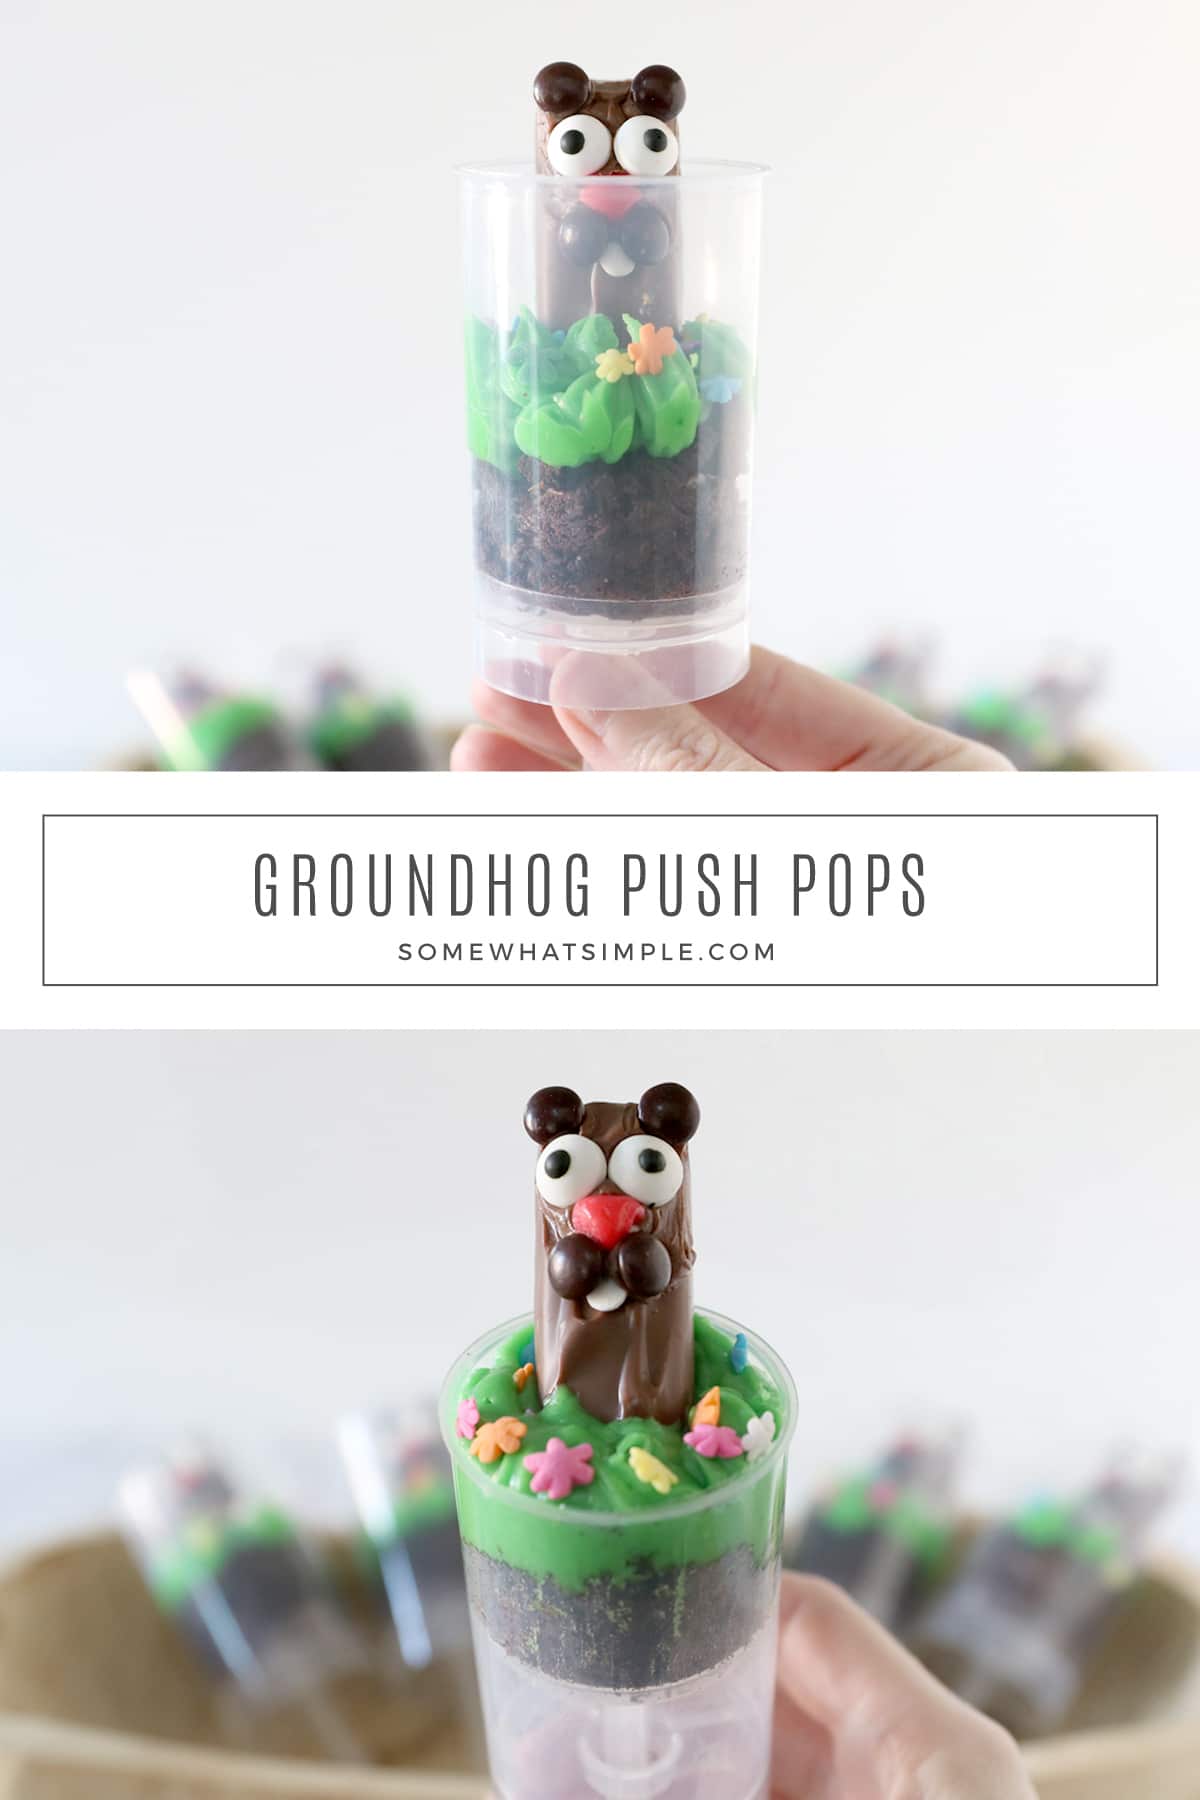 Celebrate the popular North American tradition with some fun Groundhogs Day Treats! These Push-Up Cake Pops are deliciously festive and so fun for kids! via @somewhatsimple